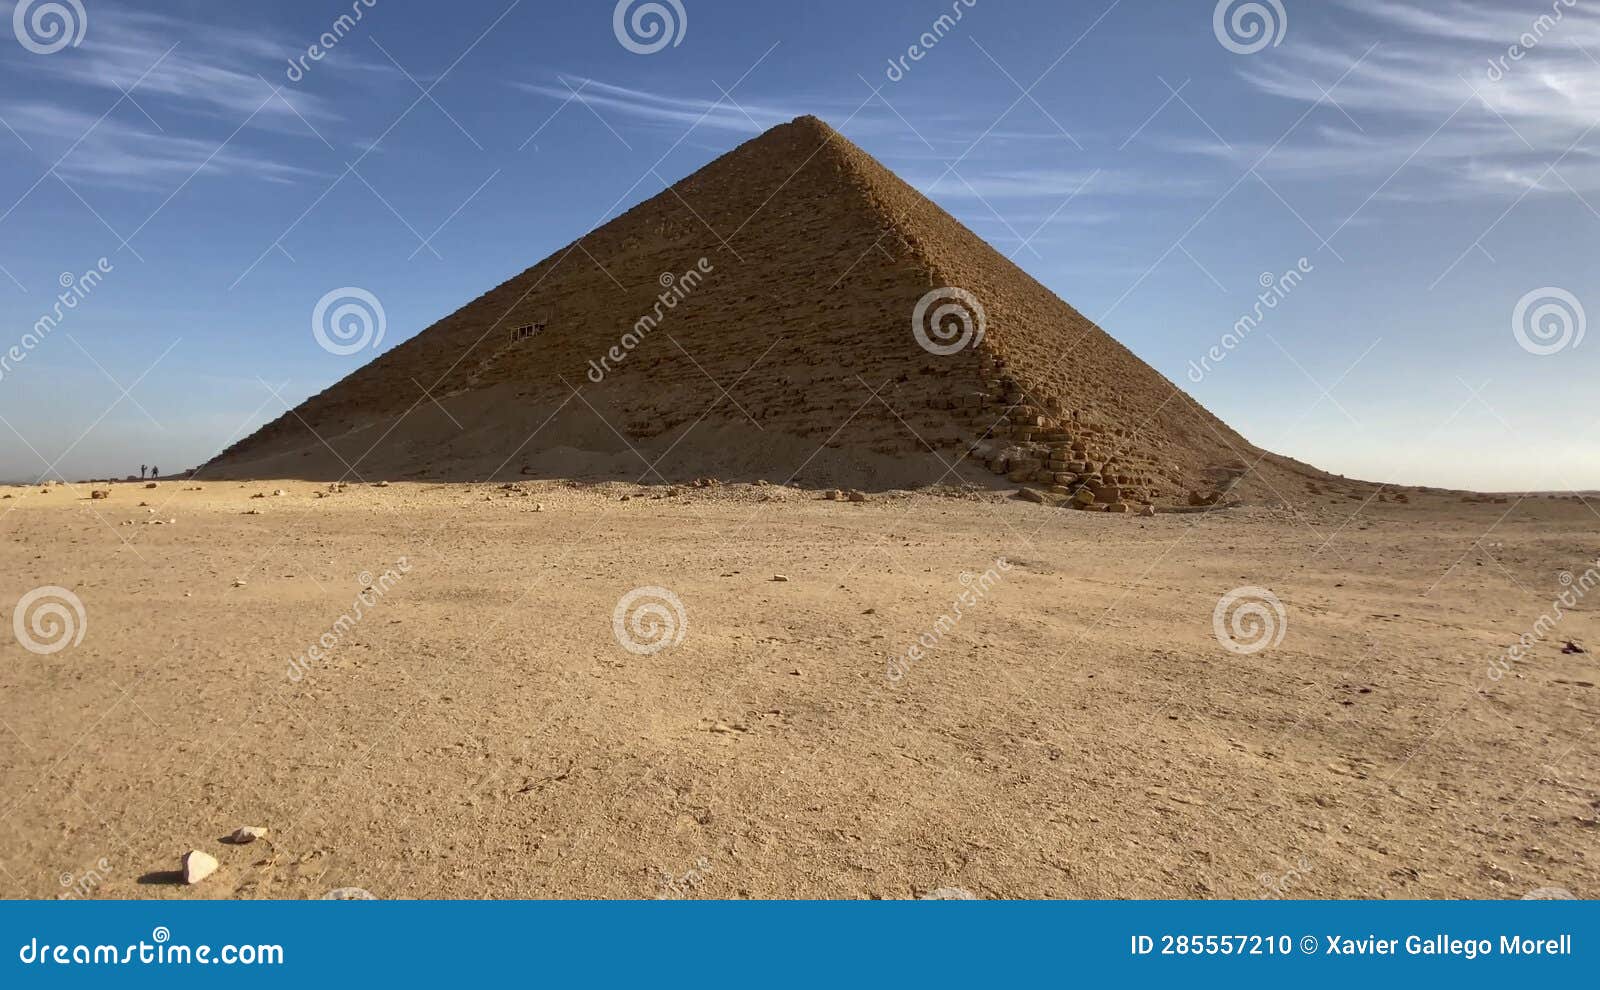 The Red Pyramid is the Largest Pyramid of King Sneferu at Dahshur ...